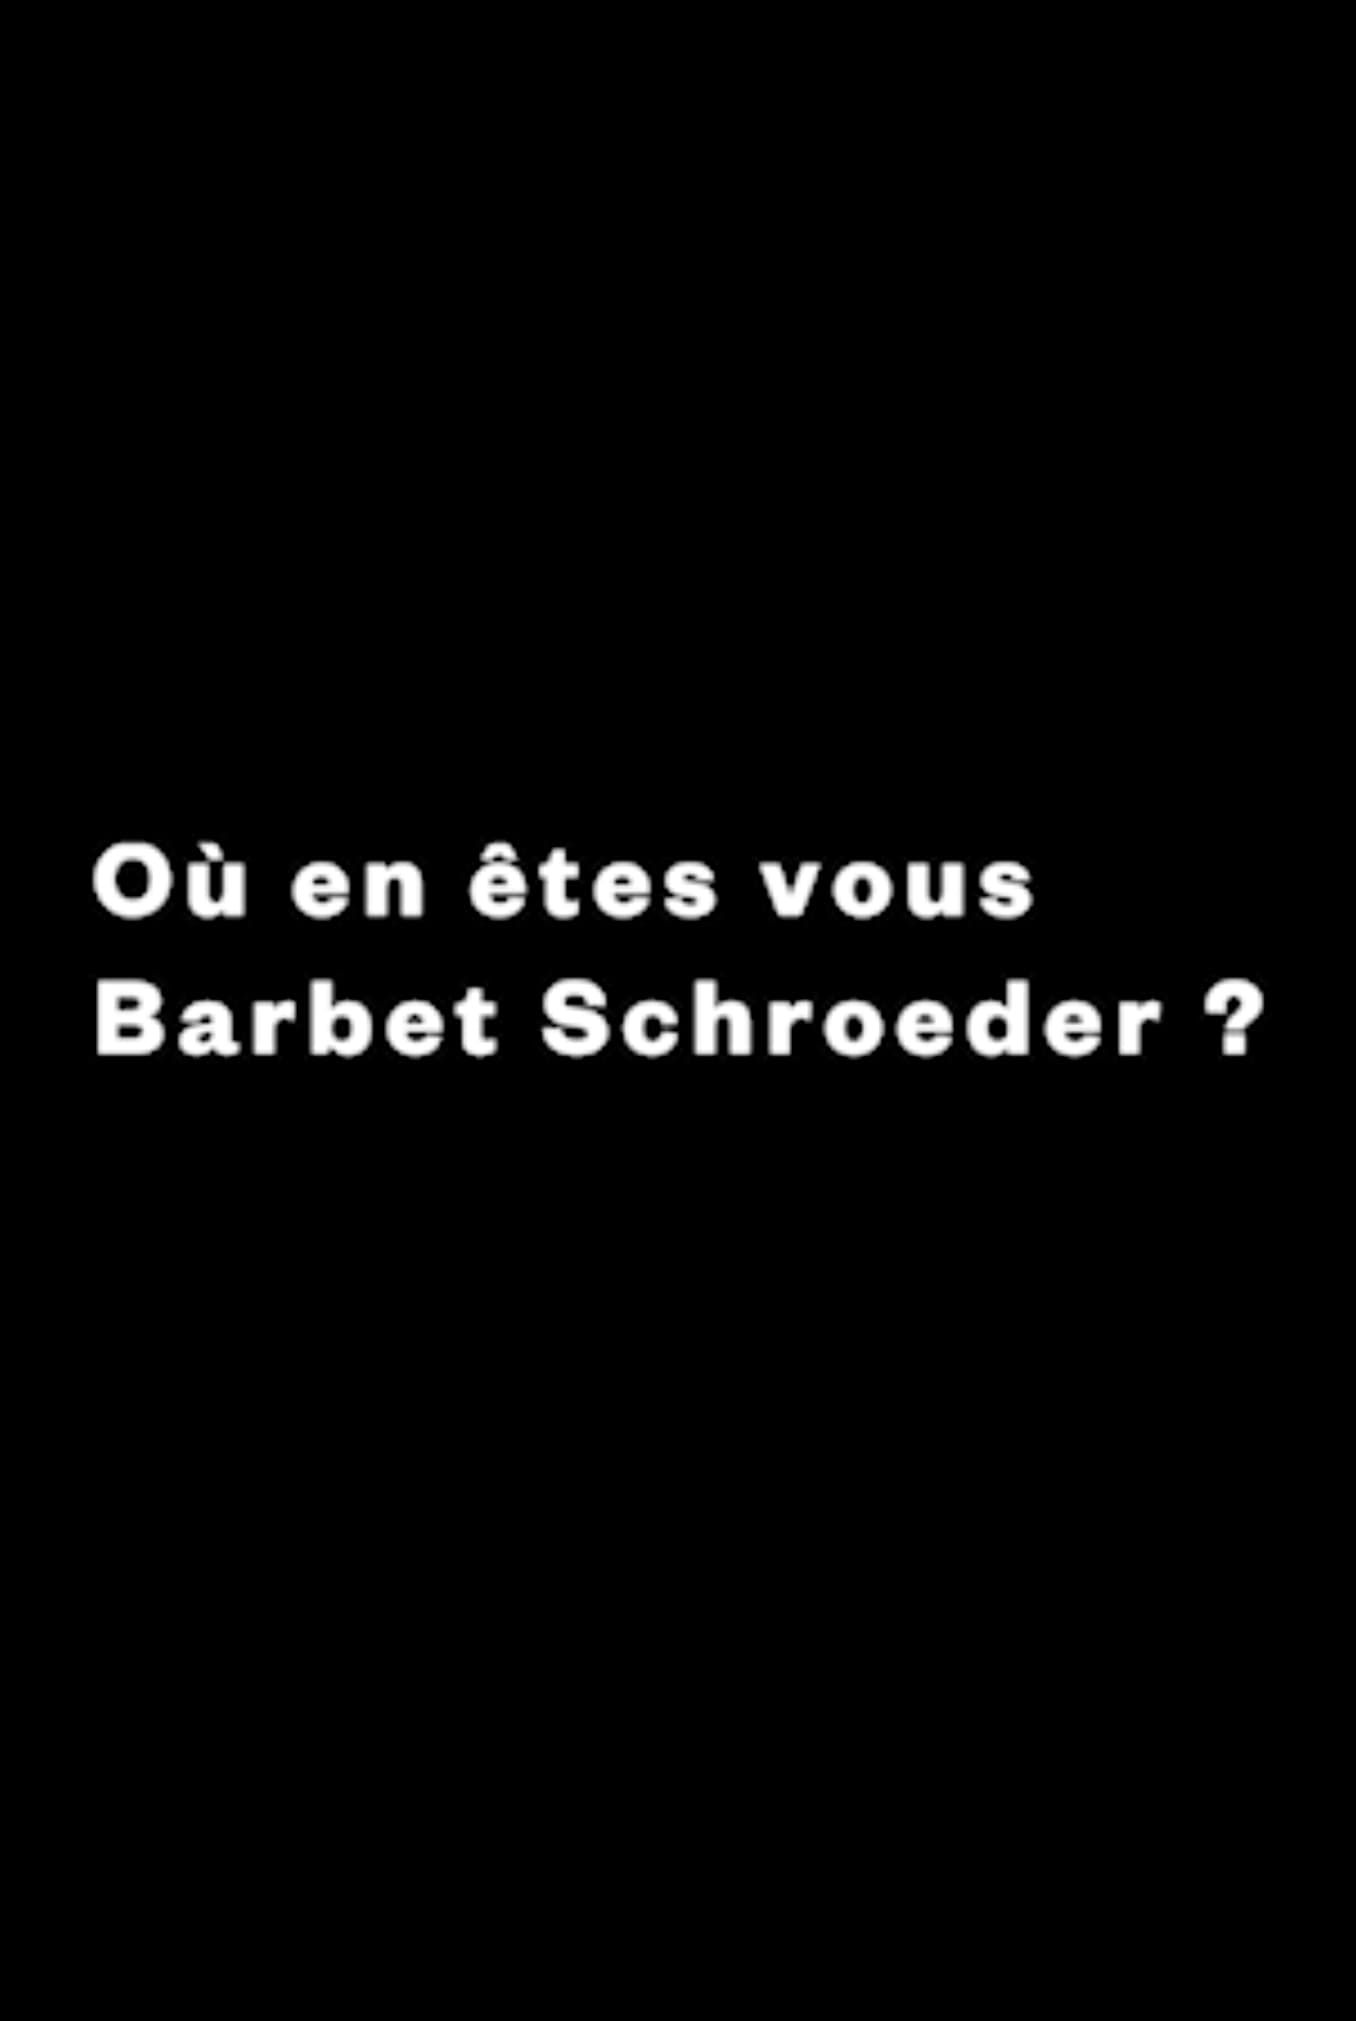 What Are You Up To, Barbet Schroeder? (2017)